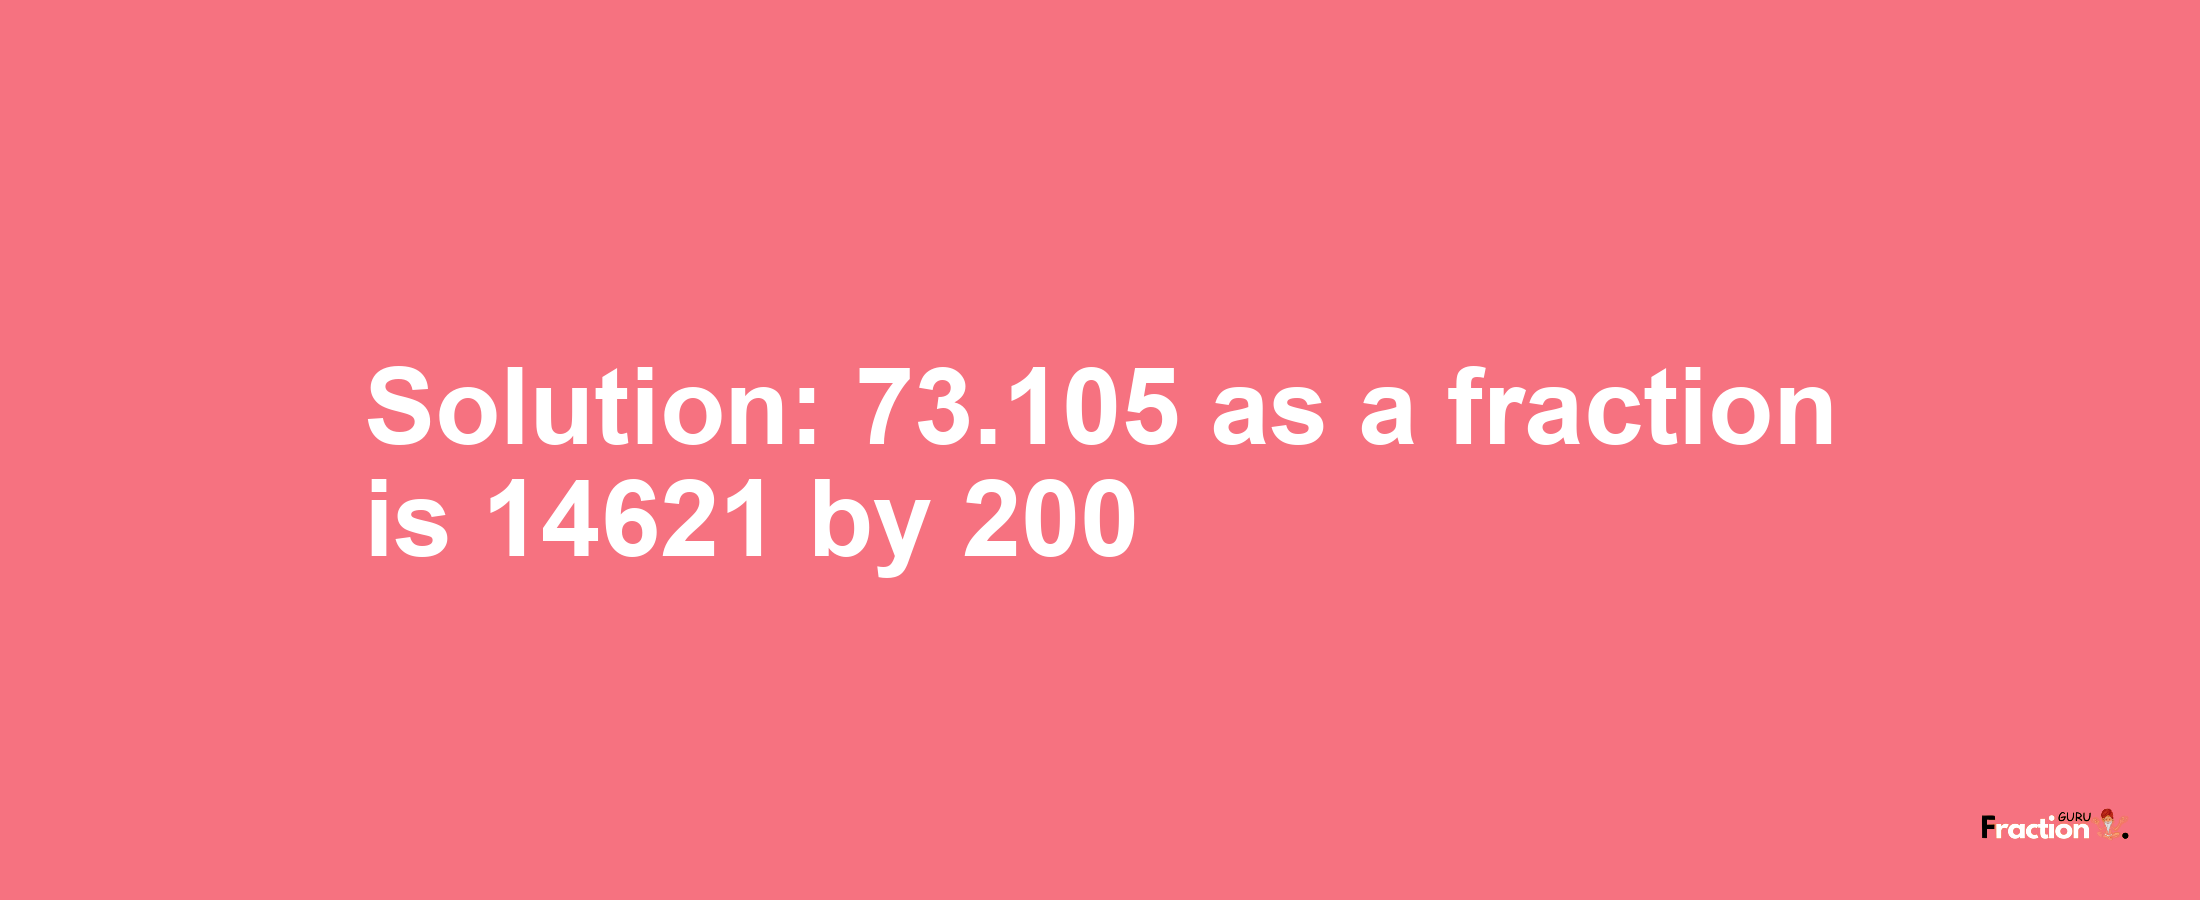 Solution:73.105 as a fraction is 14621/200